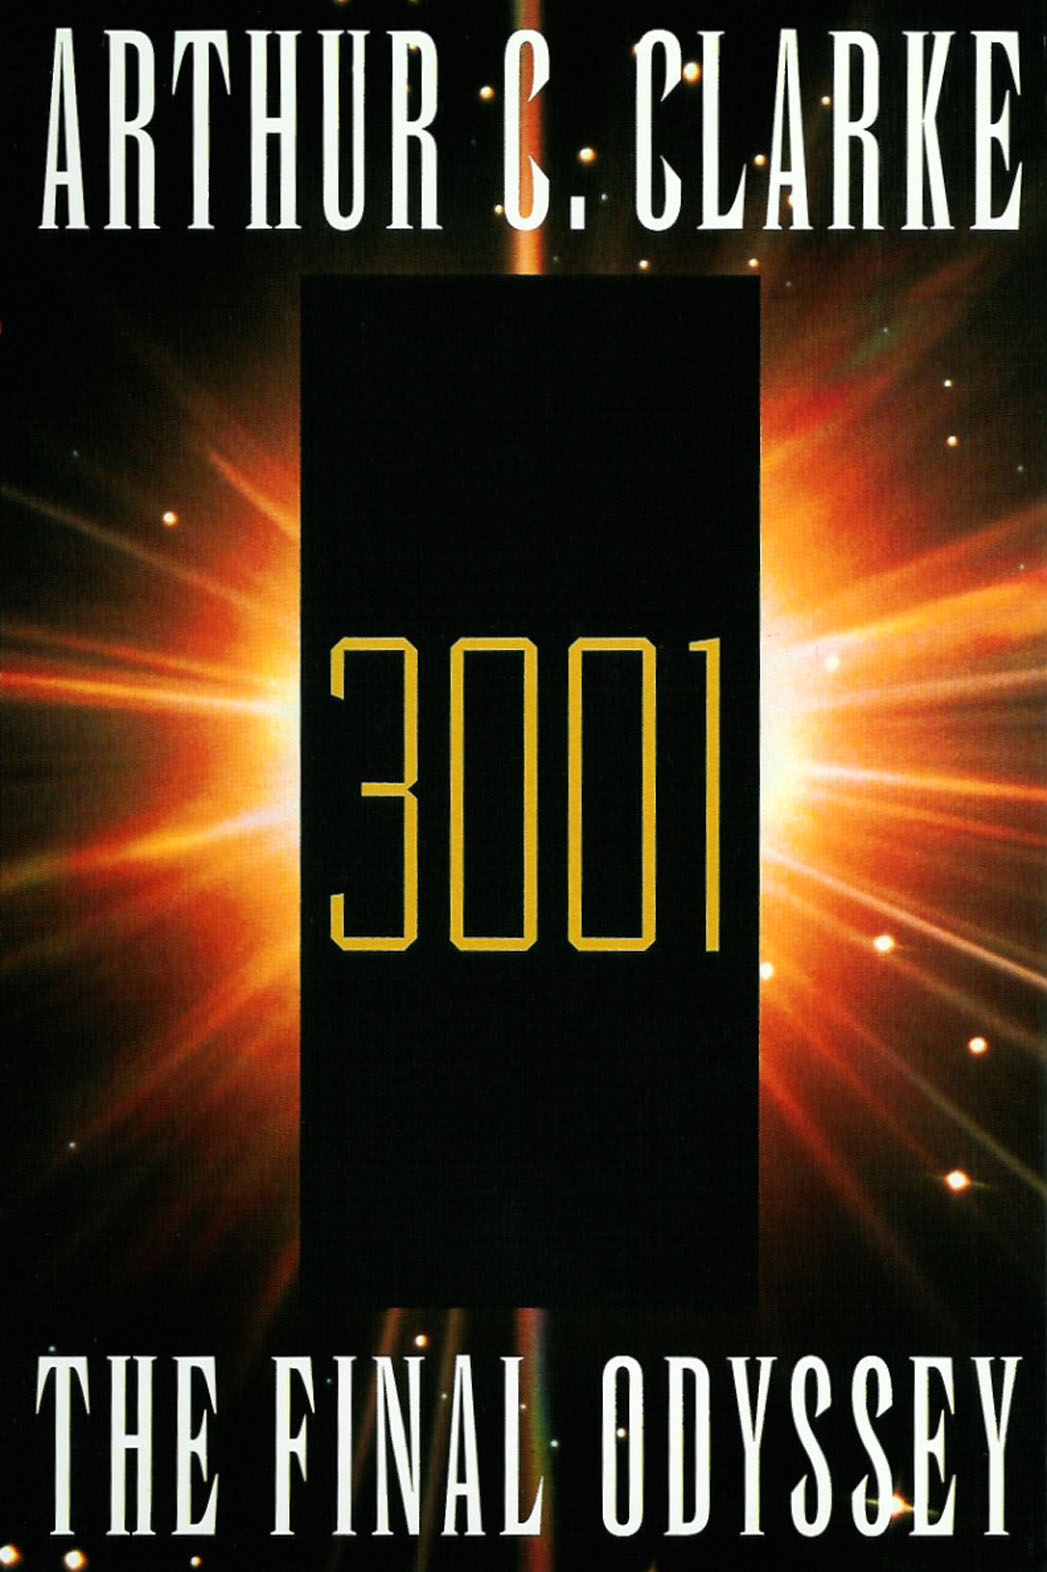 3001: The Final Odyssey Review